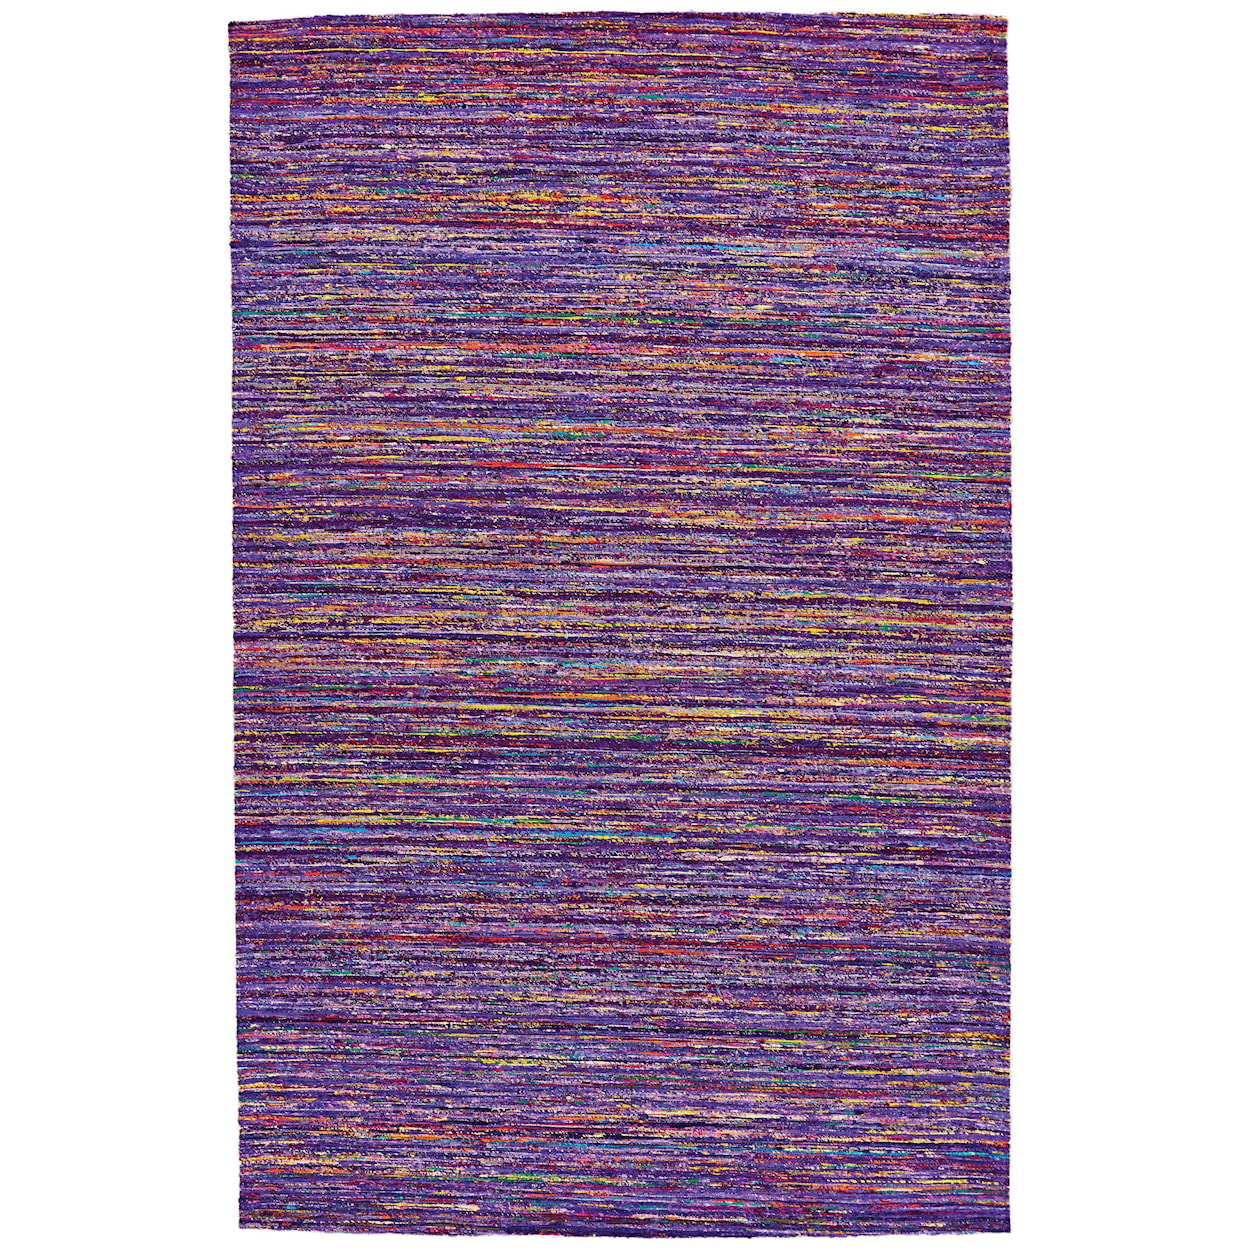 Feizy Rugs Arushi Purple 5' x 8' Area Rug